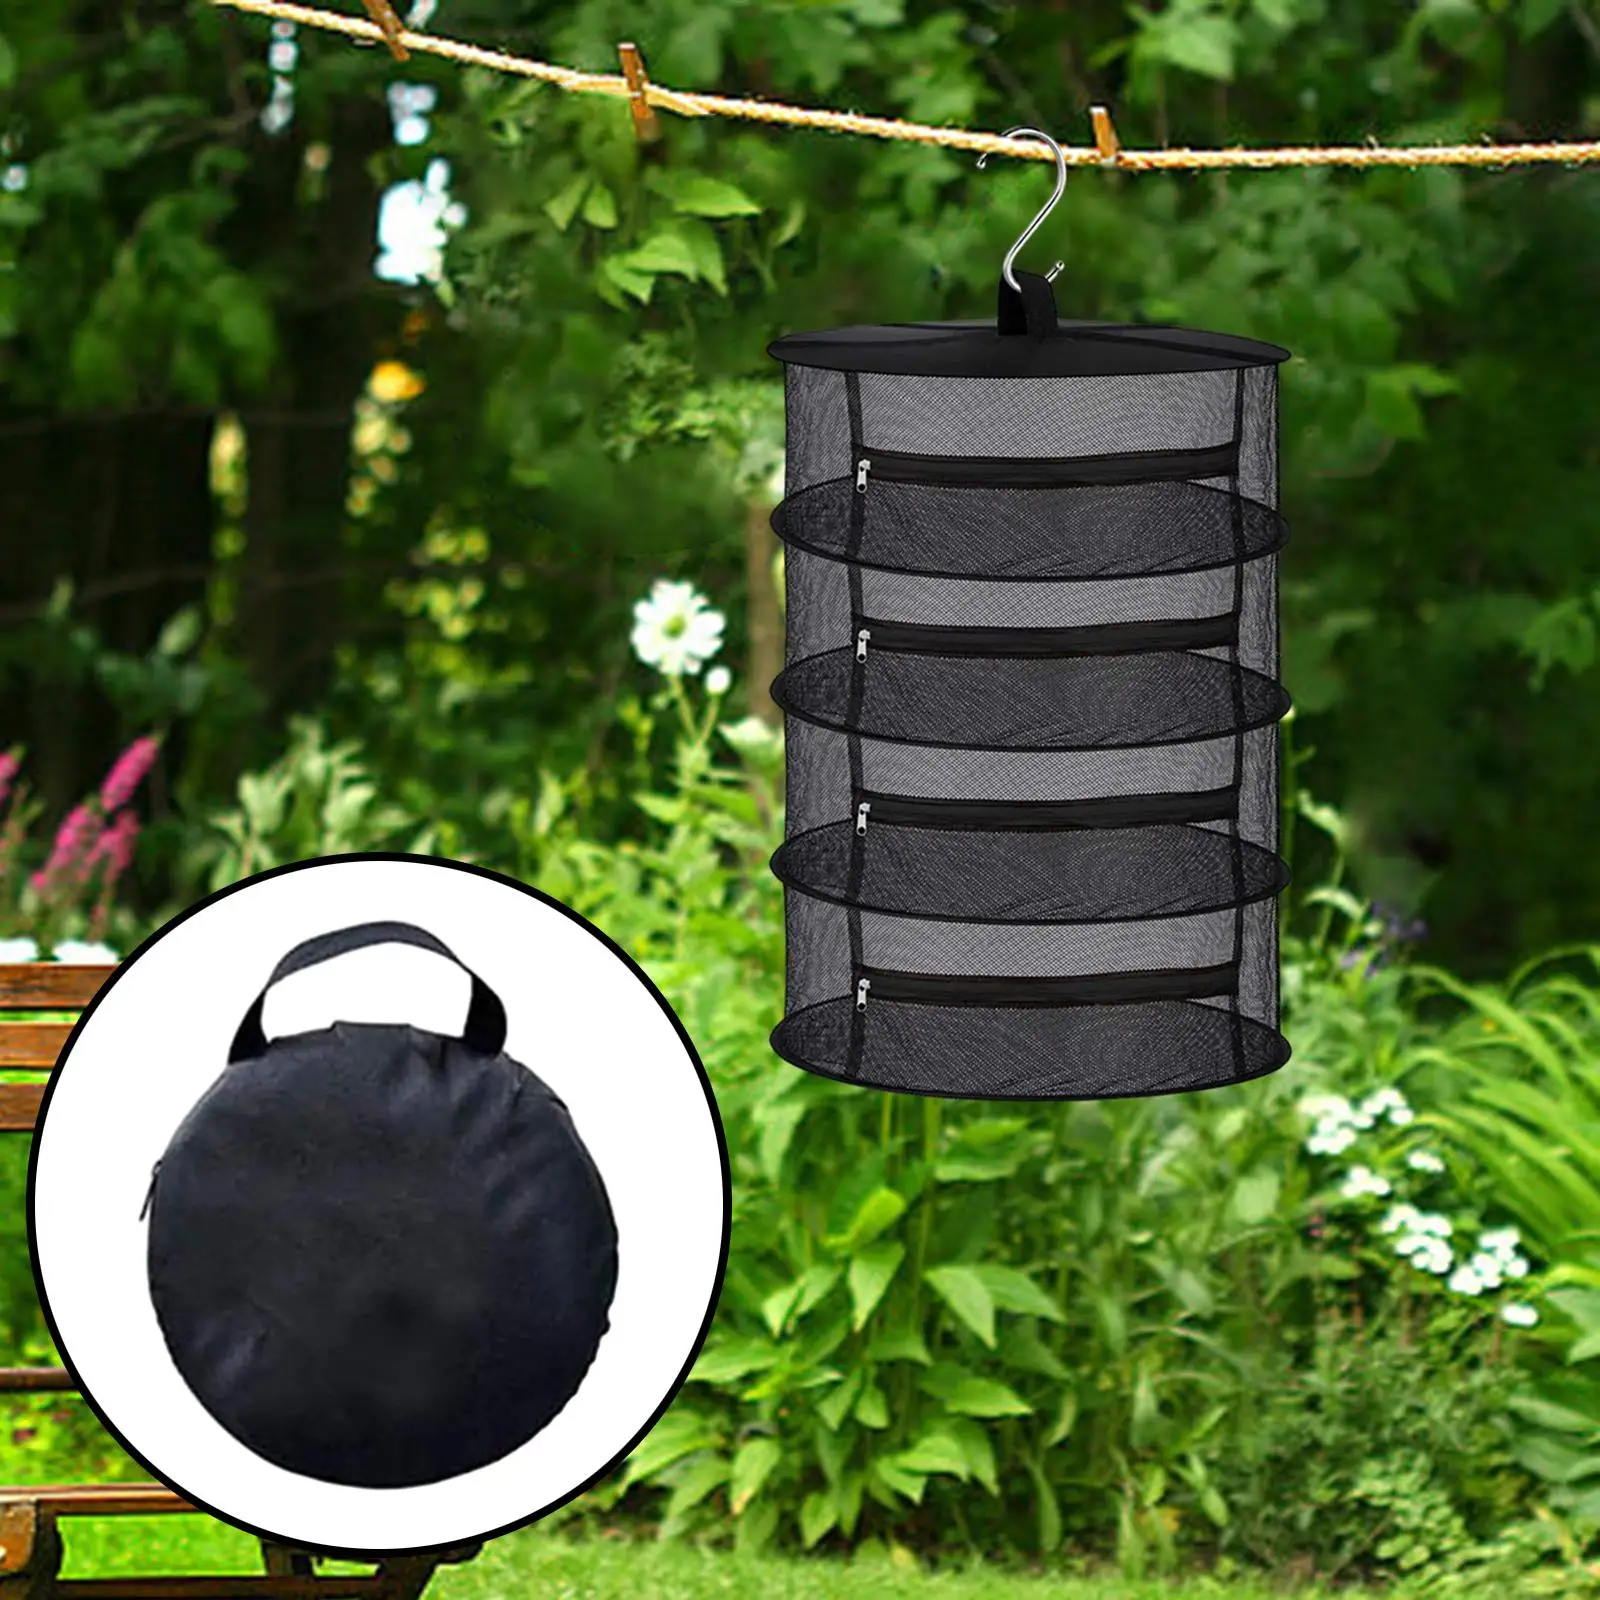 Herb Drying Rack with Hook and Storage Bag 4 Layer Folding with Zippers Dry Net for Vegetable Buds Flowers Garden Outdoor Black